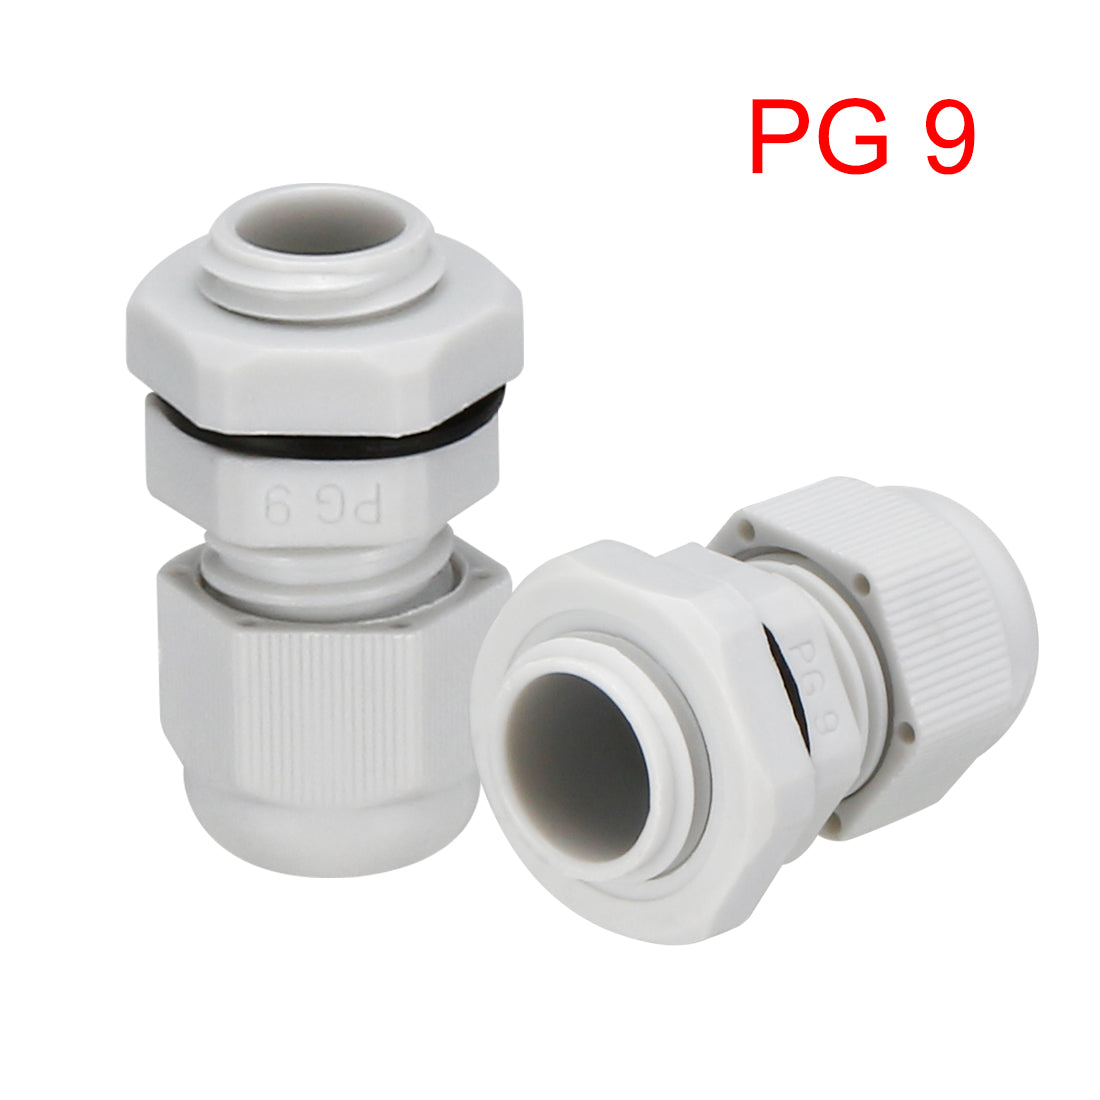 uxcell Uxcell 5Pcs PG9 Cable Gland Waterproof Plastic Joint Adjustable Locknut White for 4mm-8mm Dia Cable Wire